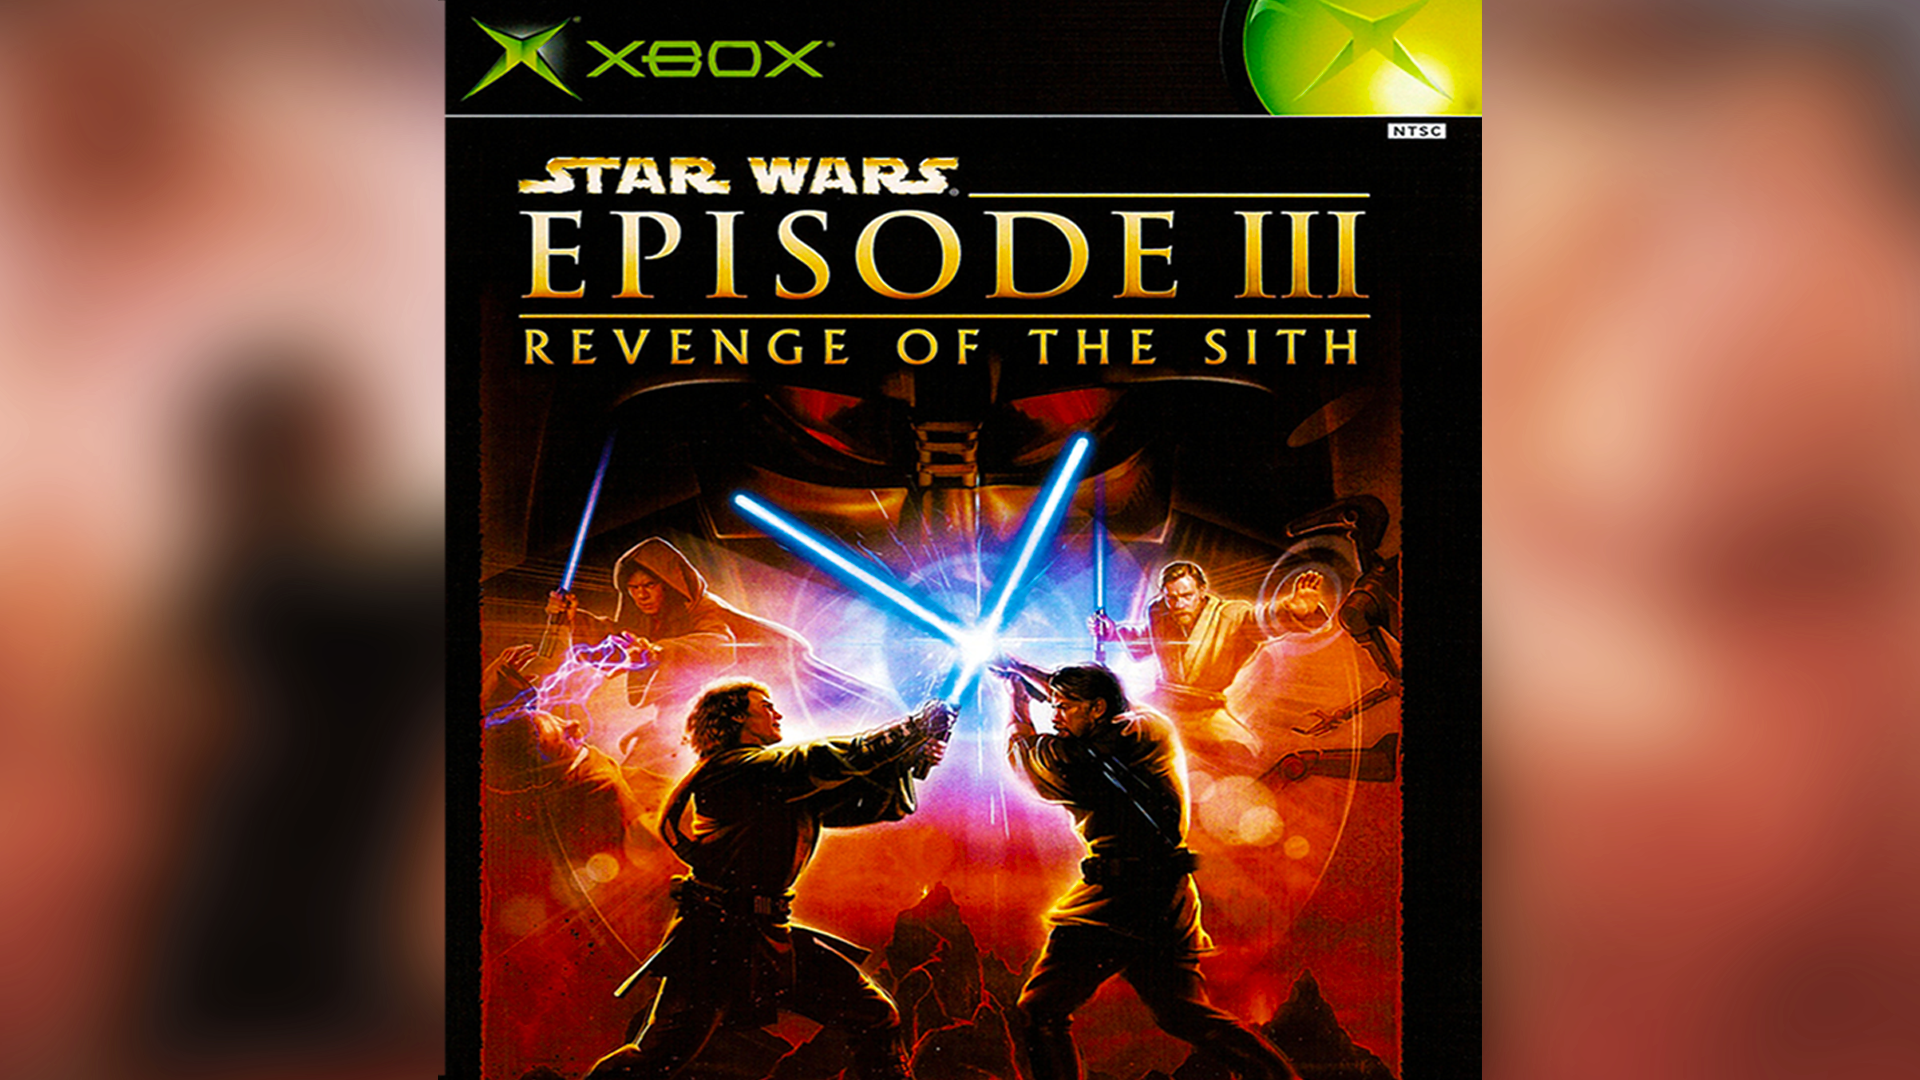 We Need More Star Wars Games Like Revenge Of The Sith